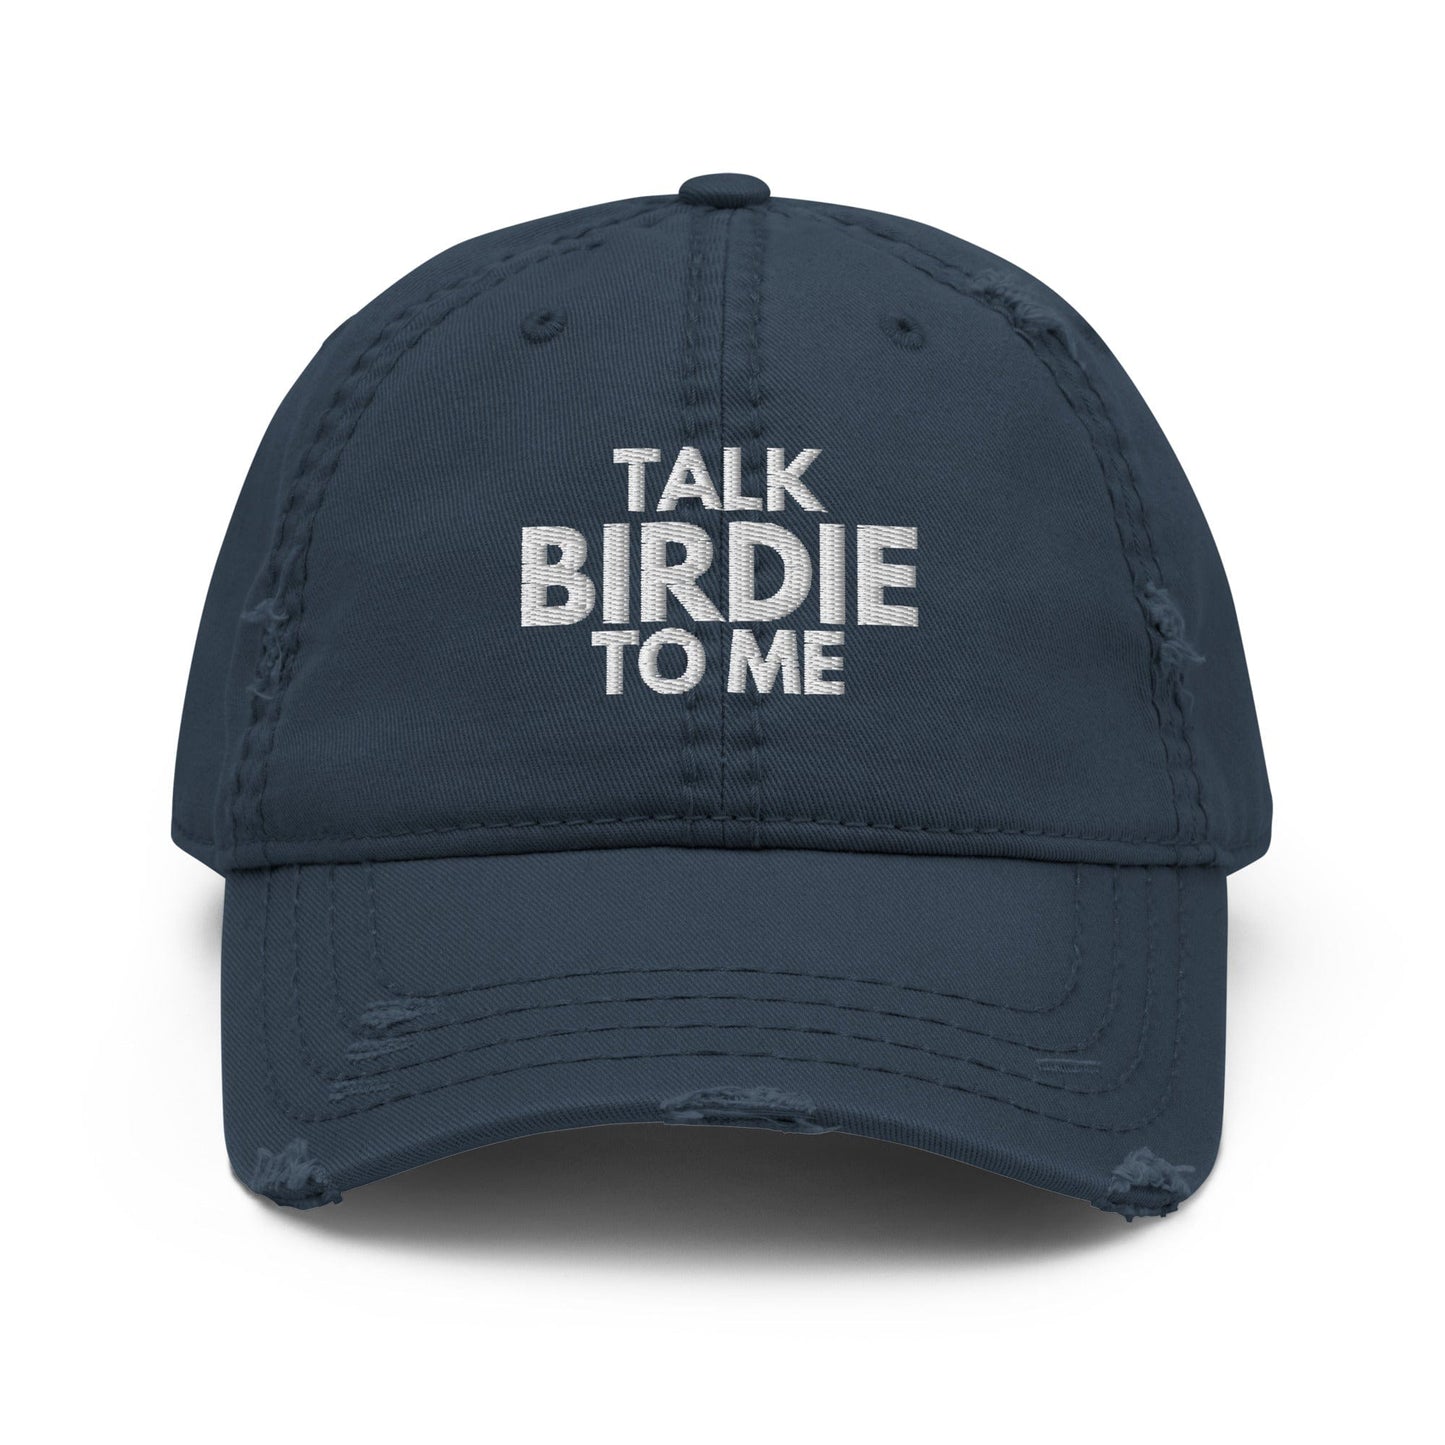 Funny Golfer Gifts  Distressed Cap Navy Talk Birdie To Me Hat Distressed Hat